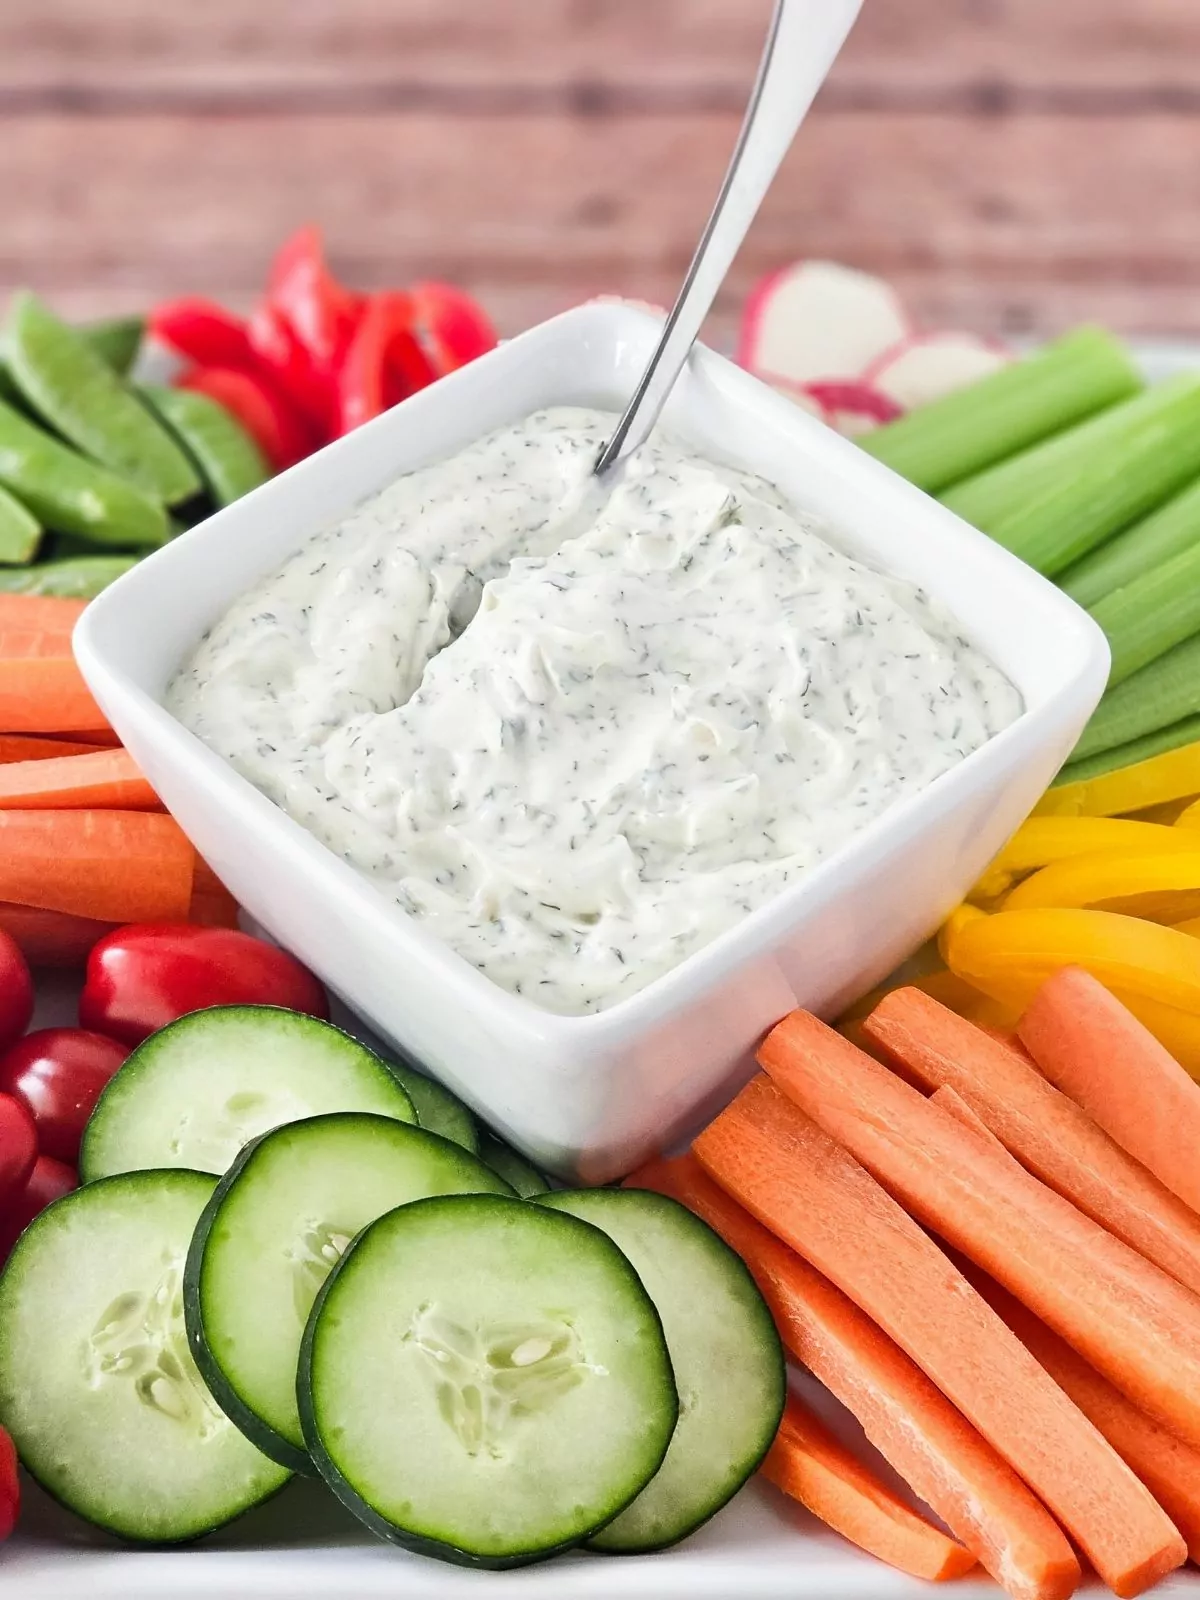 Homemade Dill Dip in small bowl with vegetables for appetizer.